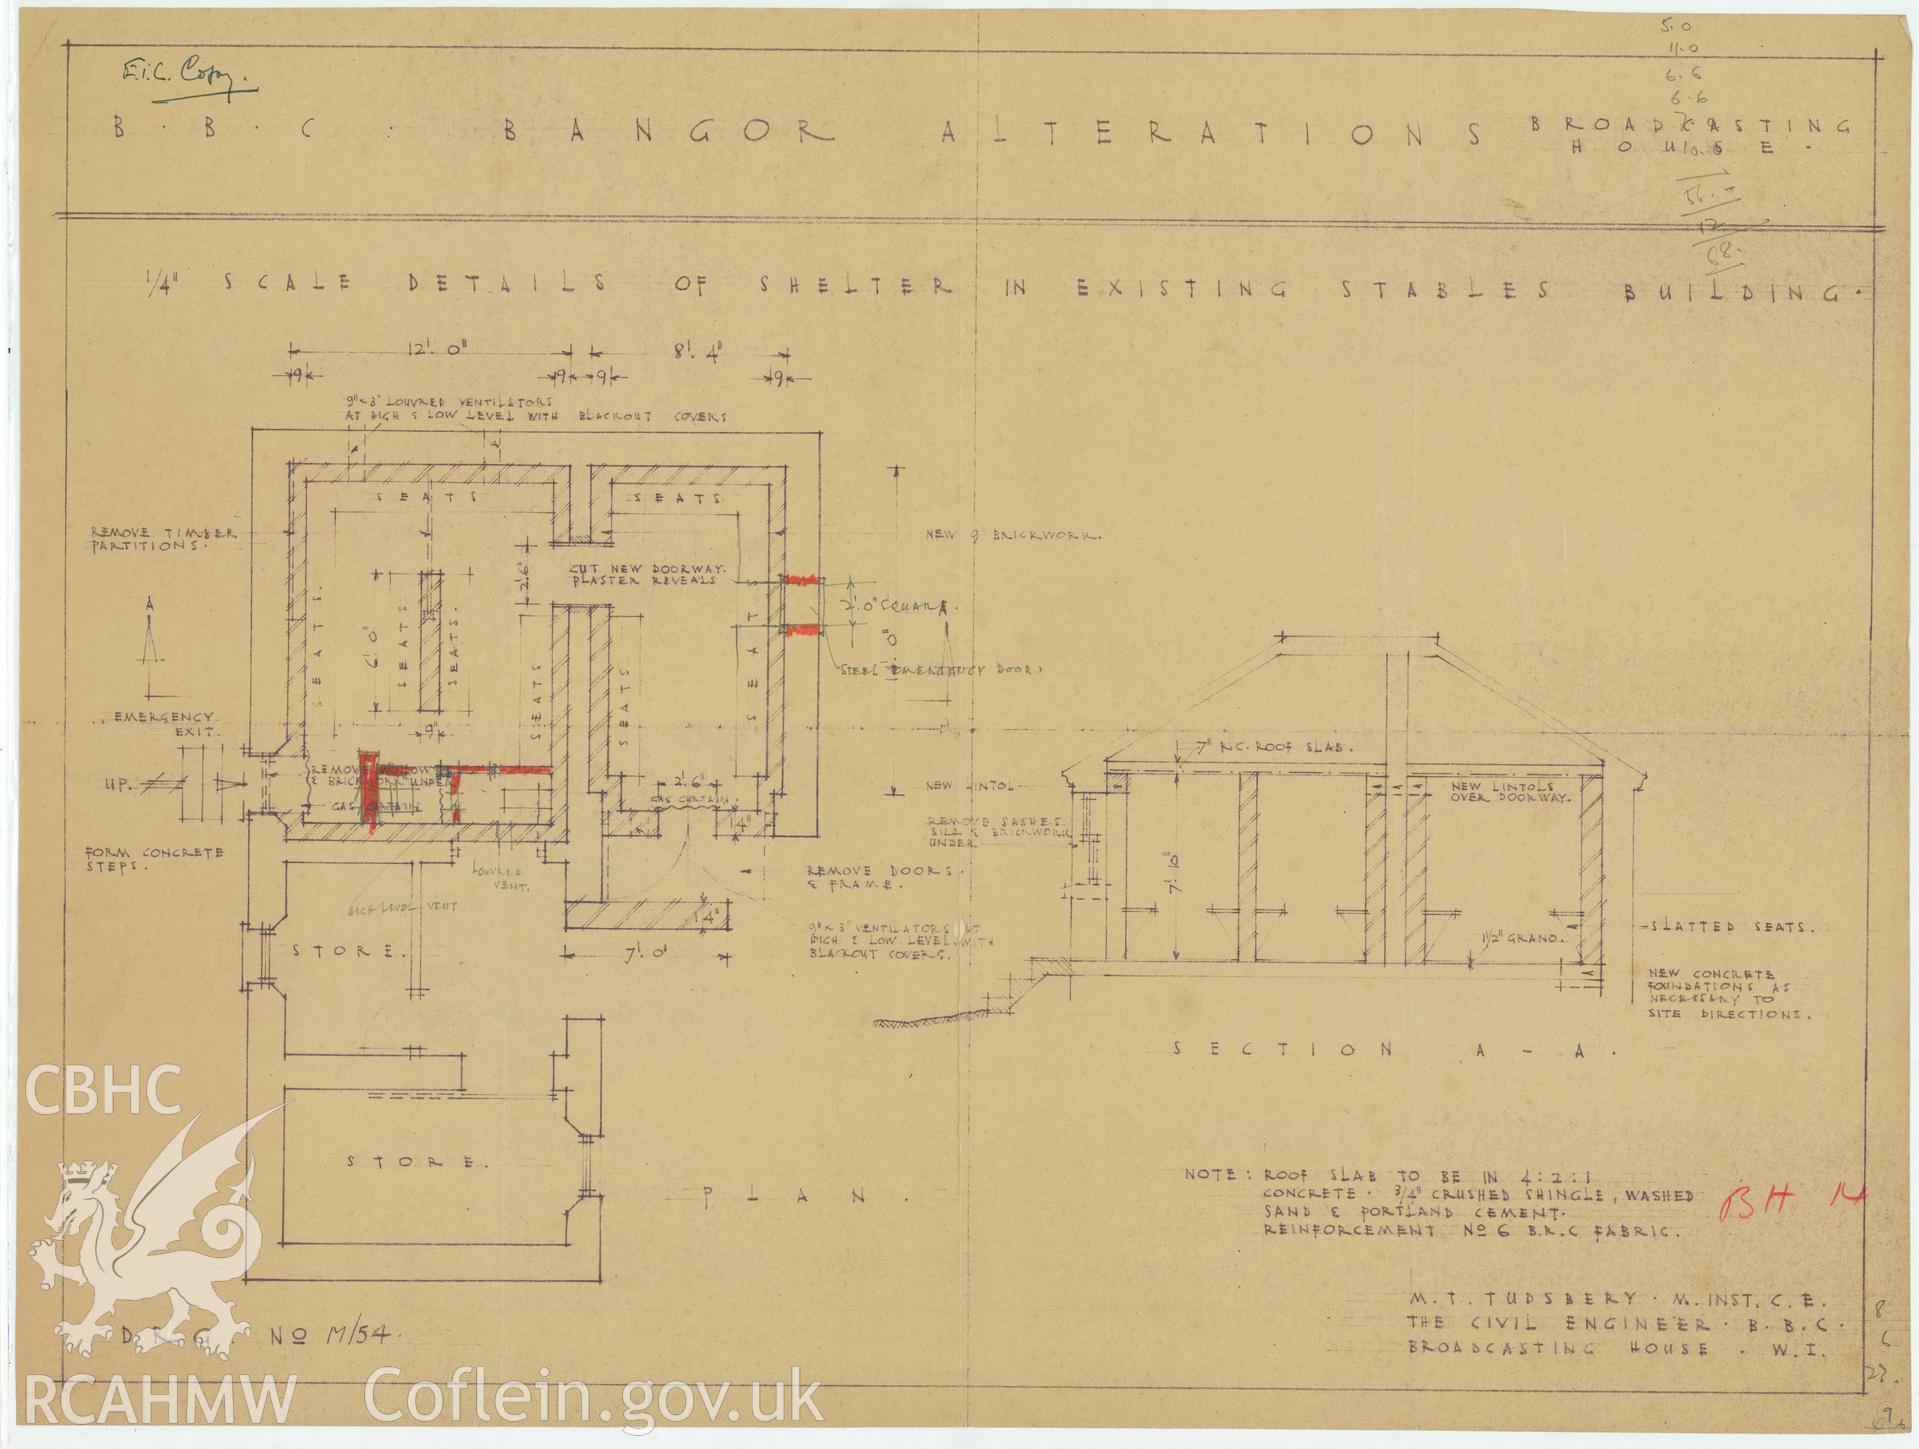 BBC premises, Broadcasting House, Bangor - elevation and plan drawing of the existing stables. Drawing No. M/54, undated.